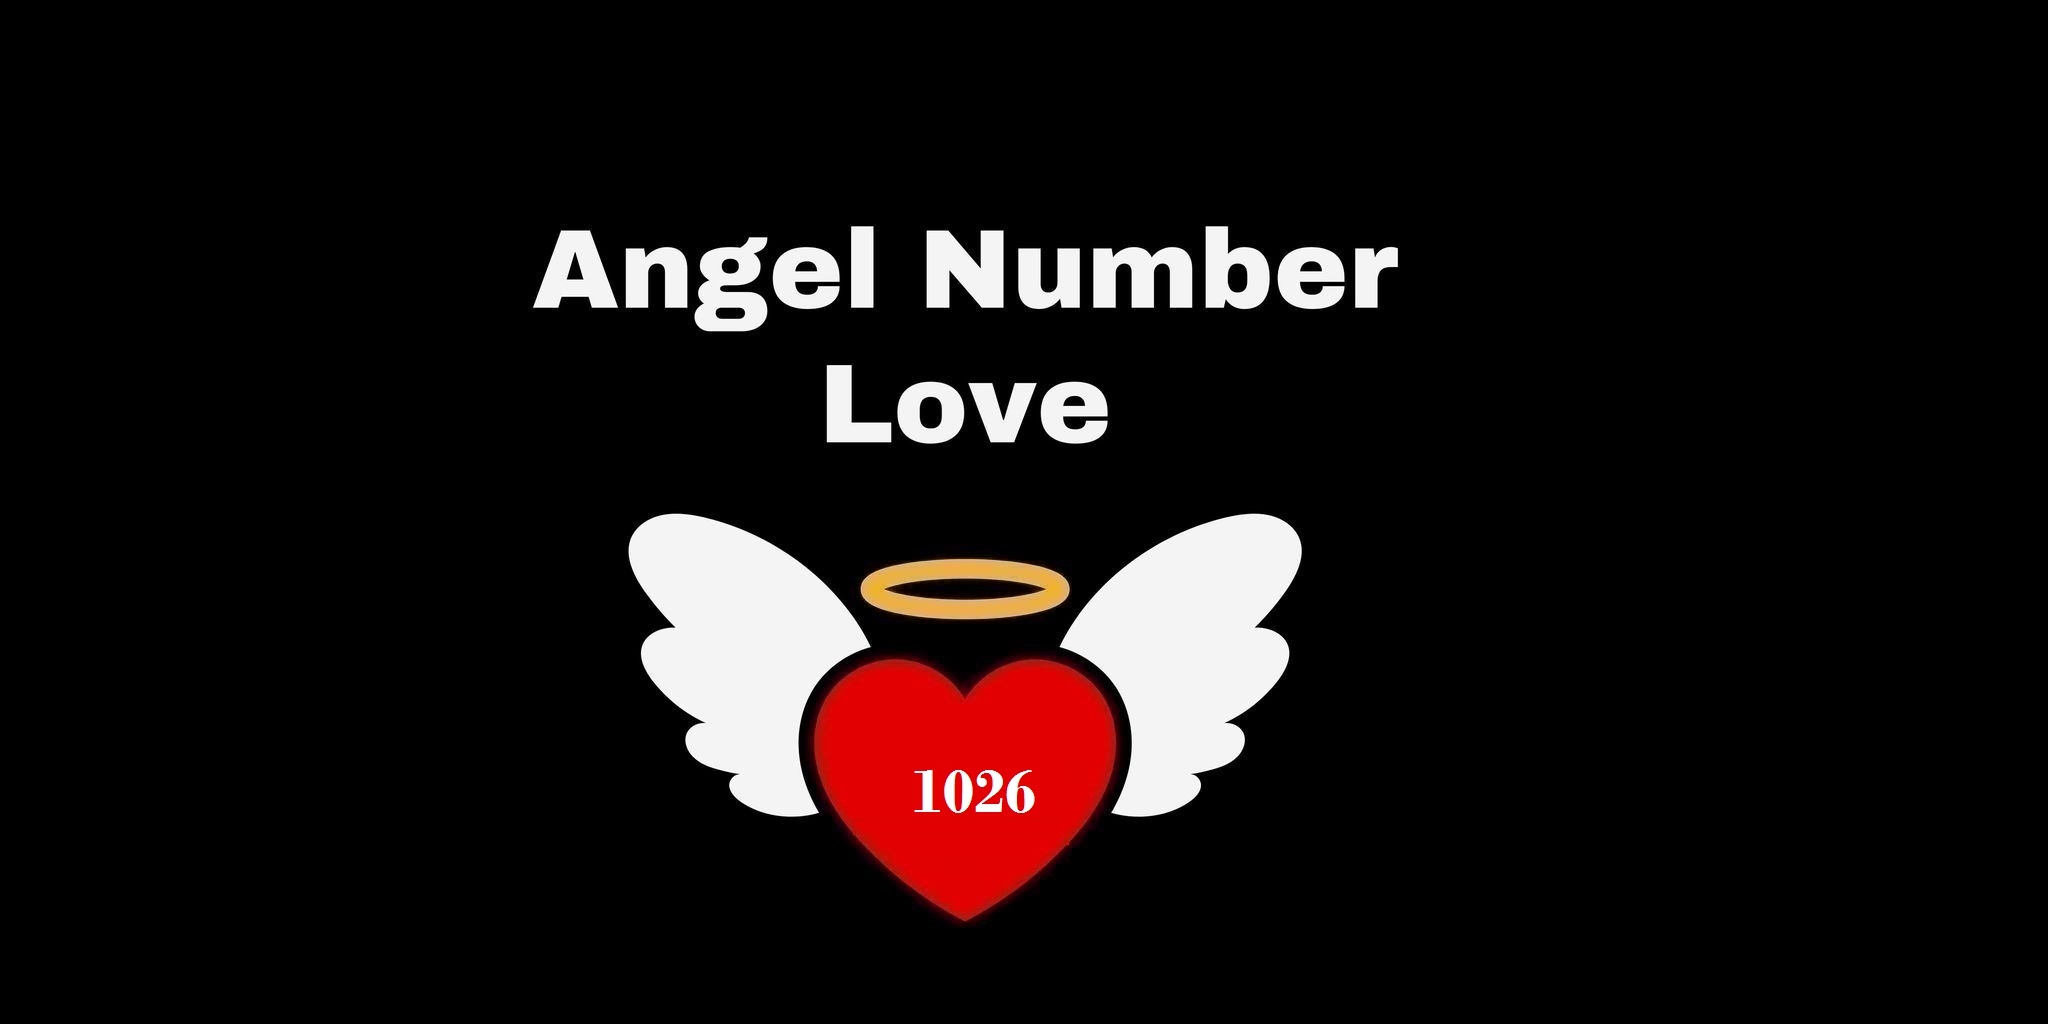 1026 Angel Number Meaning In Love